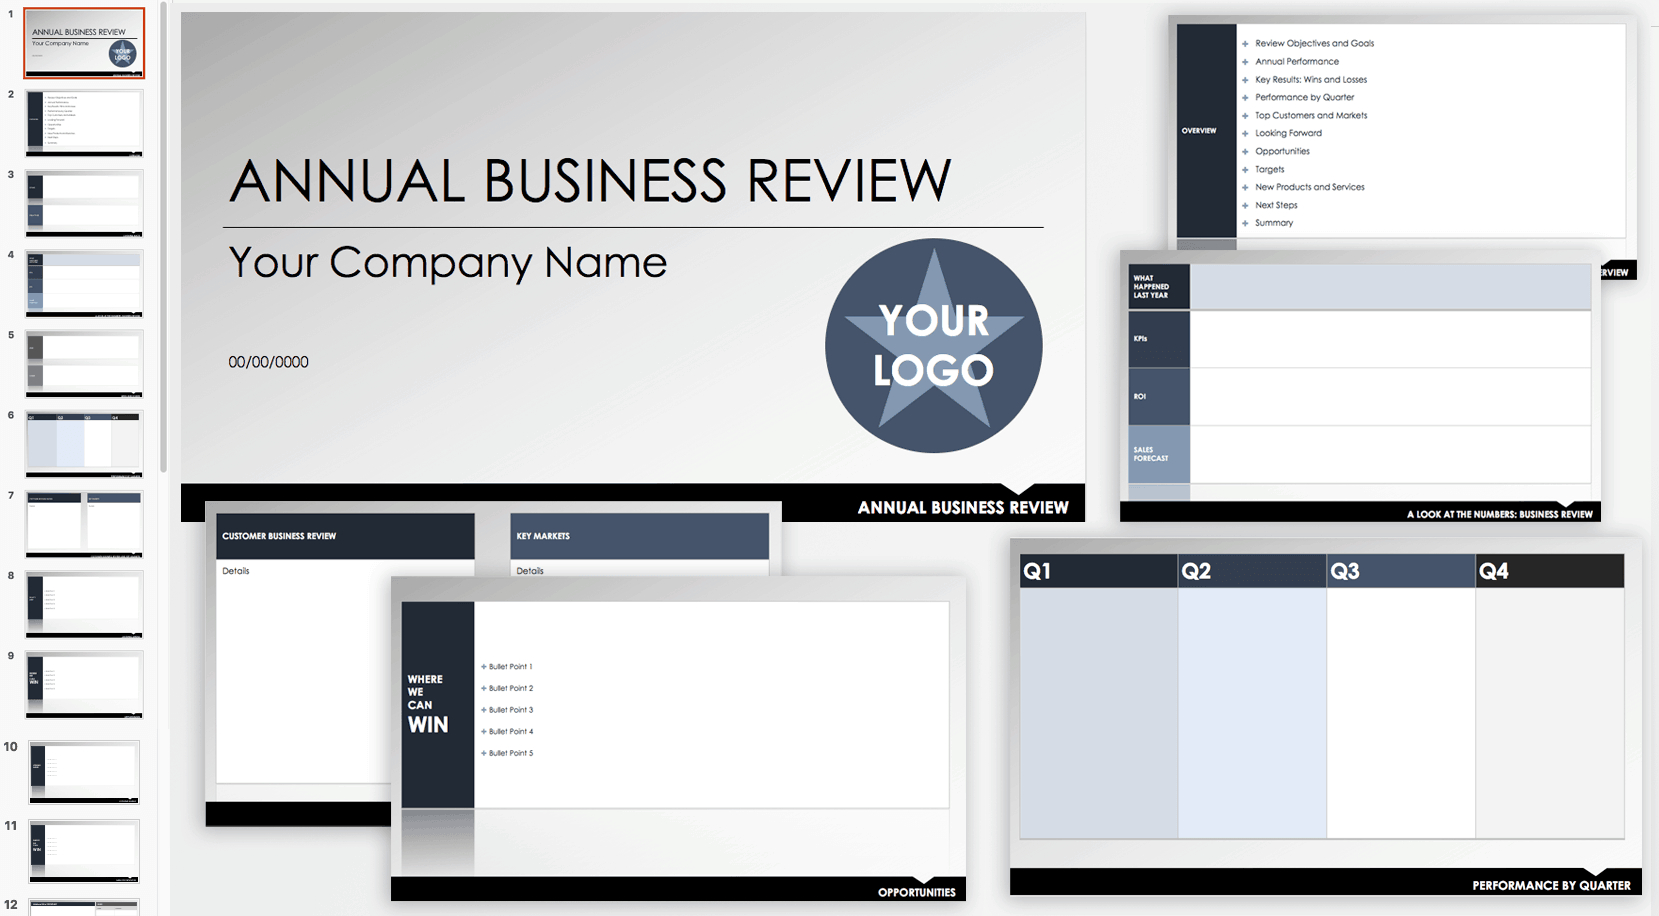 Free Qbr And Business Review Templates | Smartsheet Within Business Review Report Template